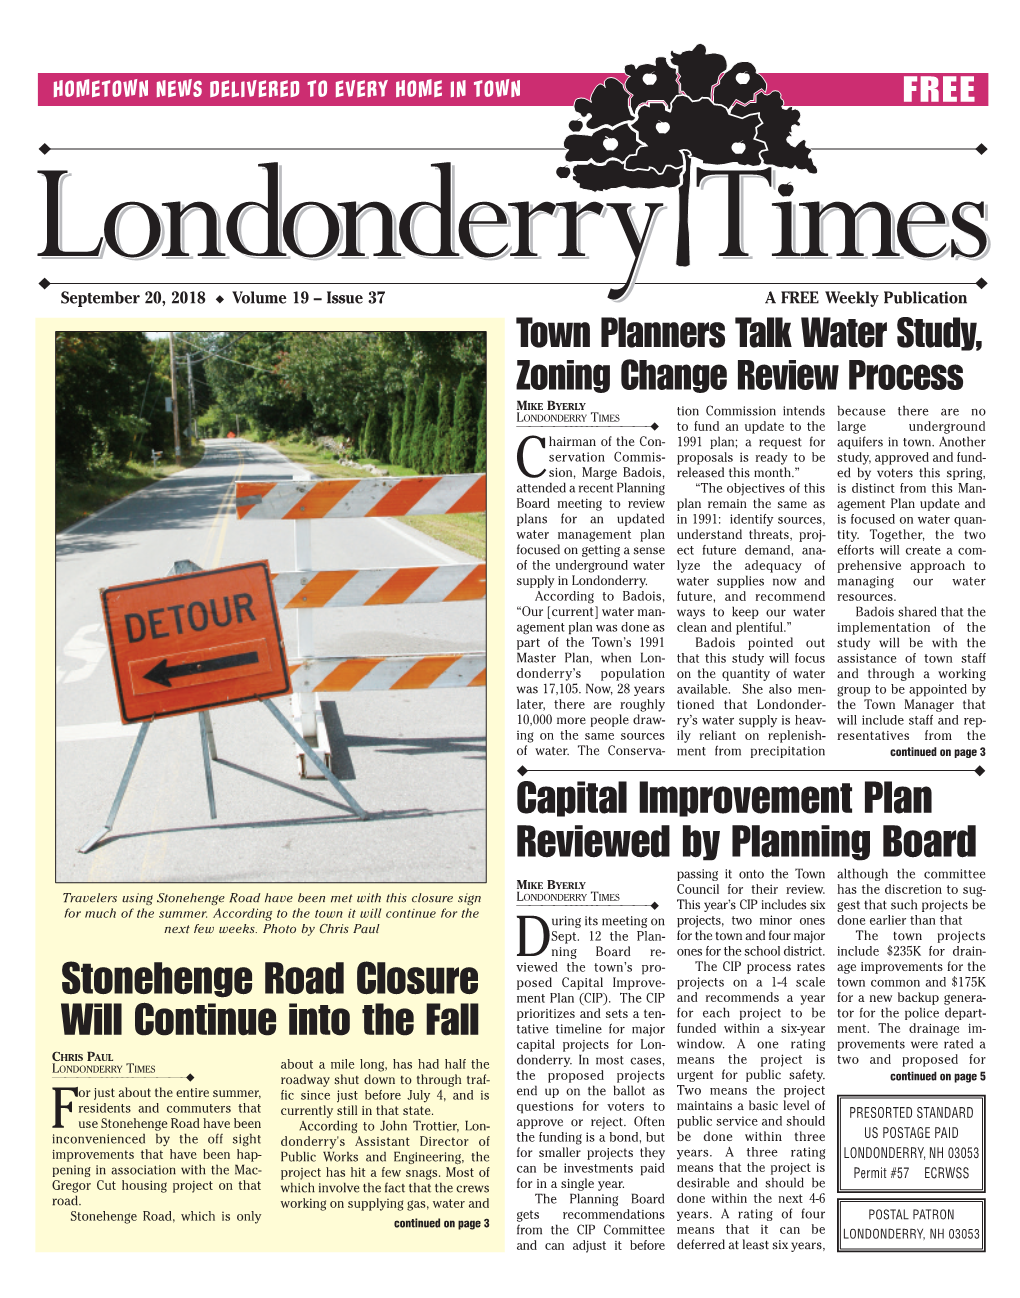 LONDONDERRY TIMES ————––––––————–◆ to Fund an Update to the Large Underground Hairman of the Con- 1991 Plan; a Request for Aquifers in Town